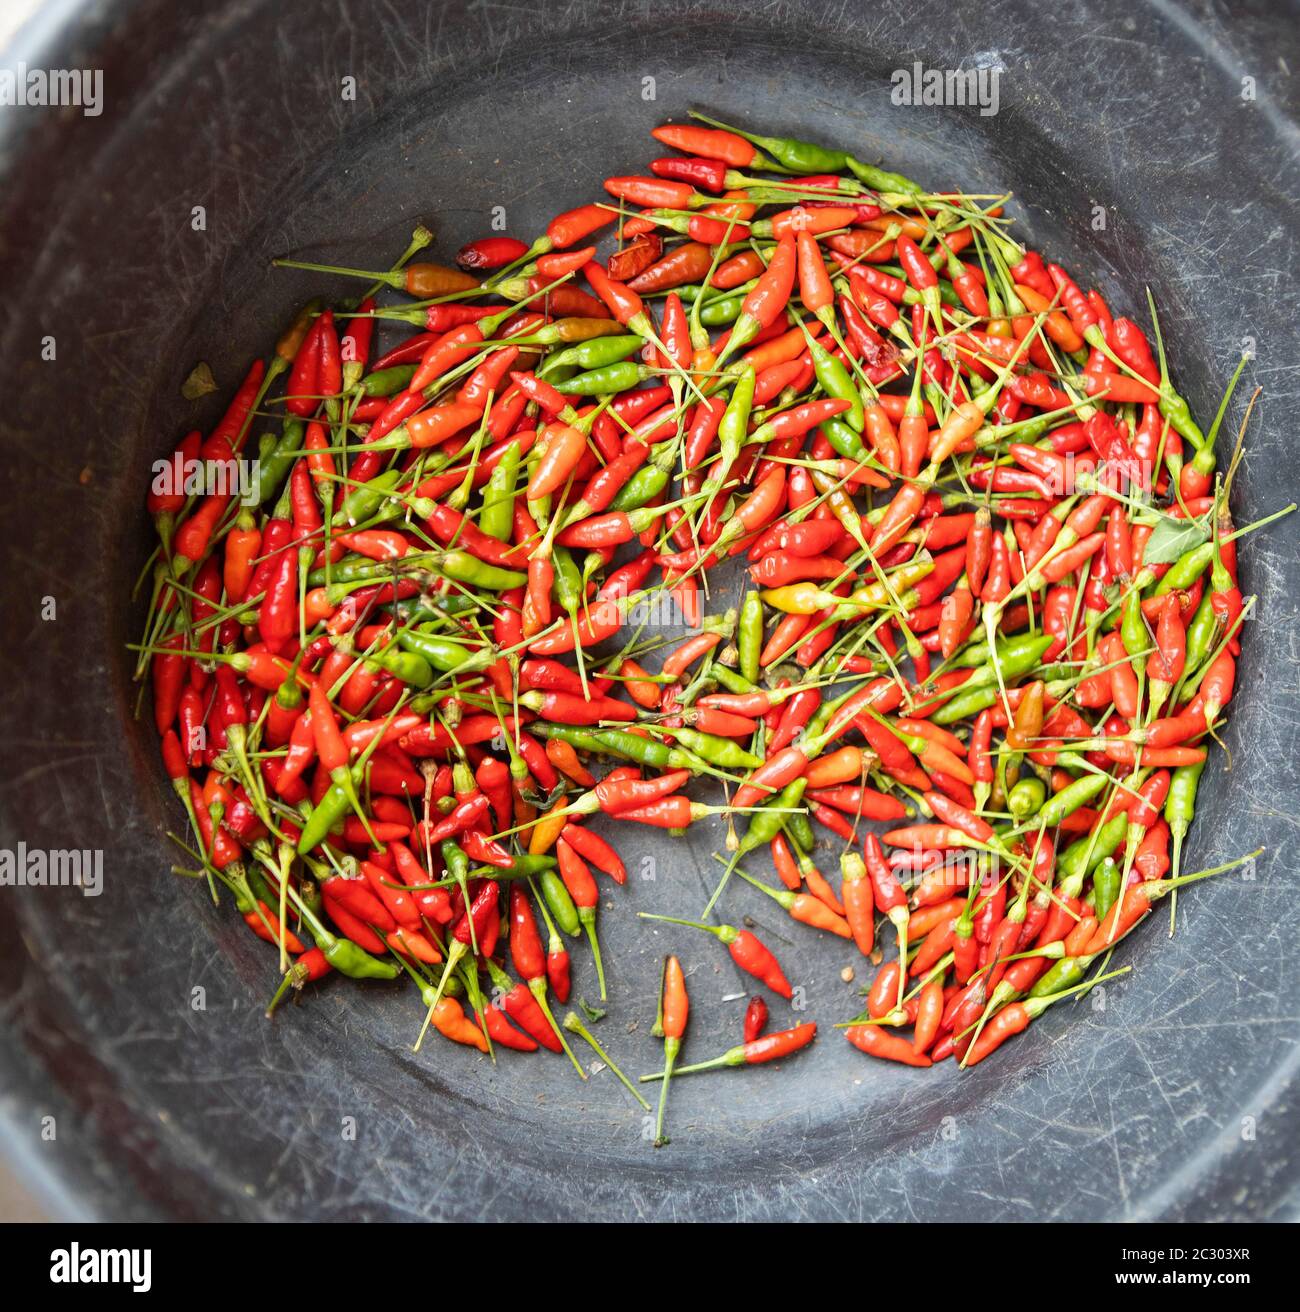 Red and green chili peppers, Lapu Lapu City, Cebu, Central Visayas, Philippines Stock Photo